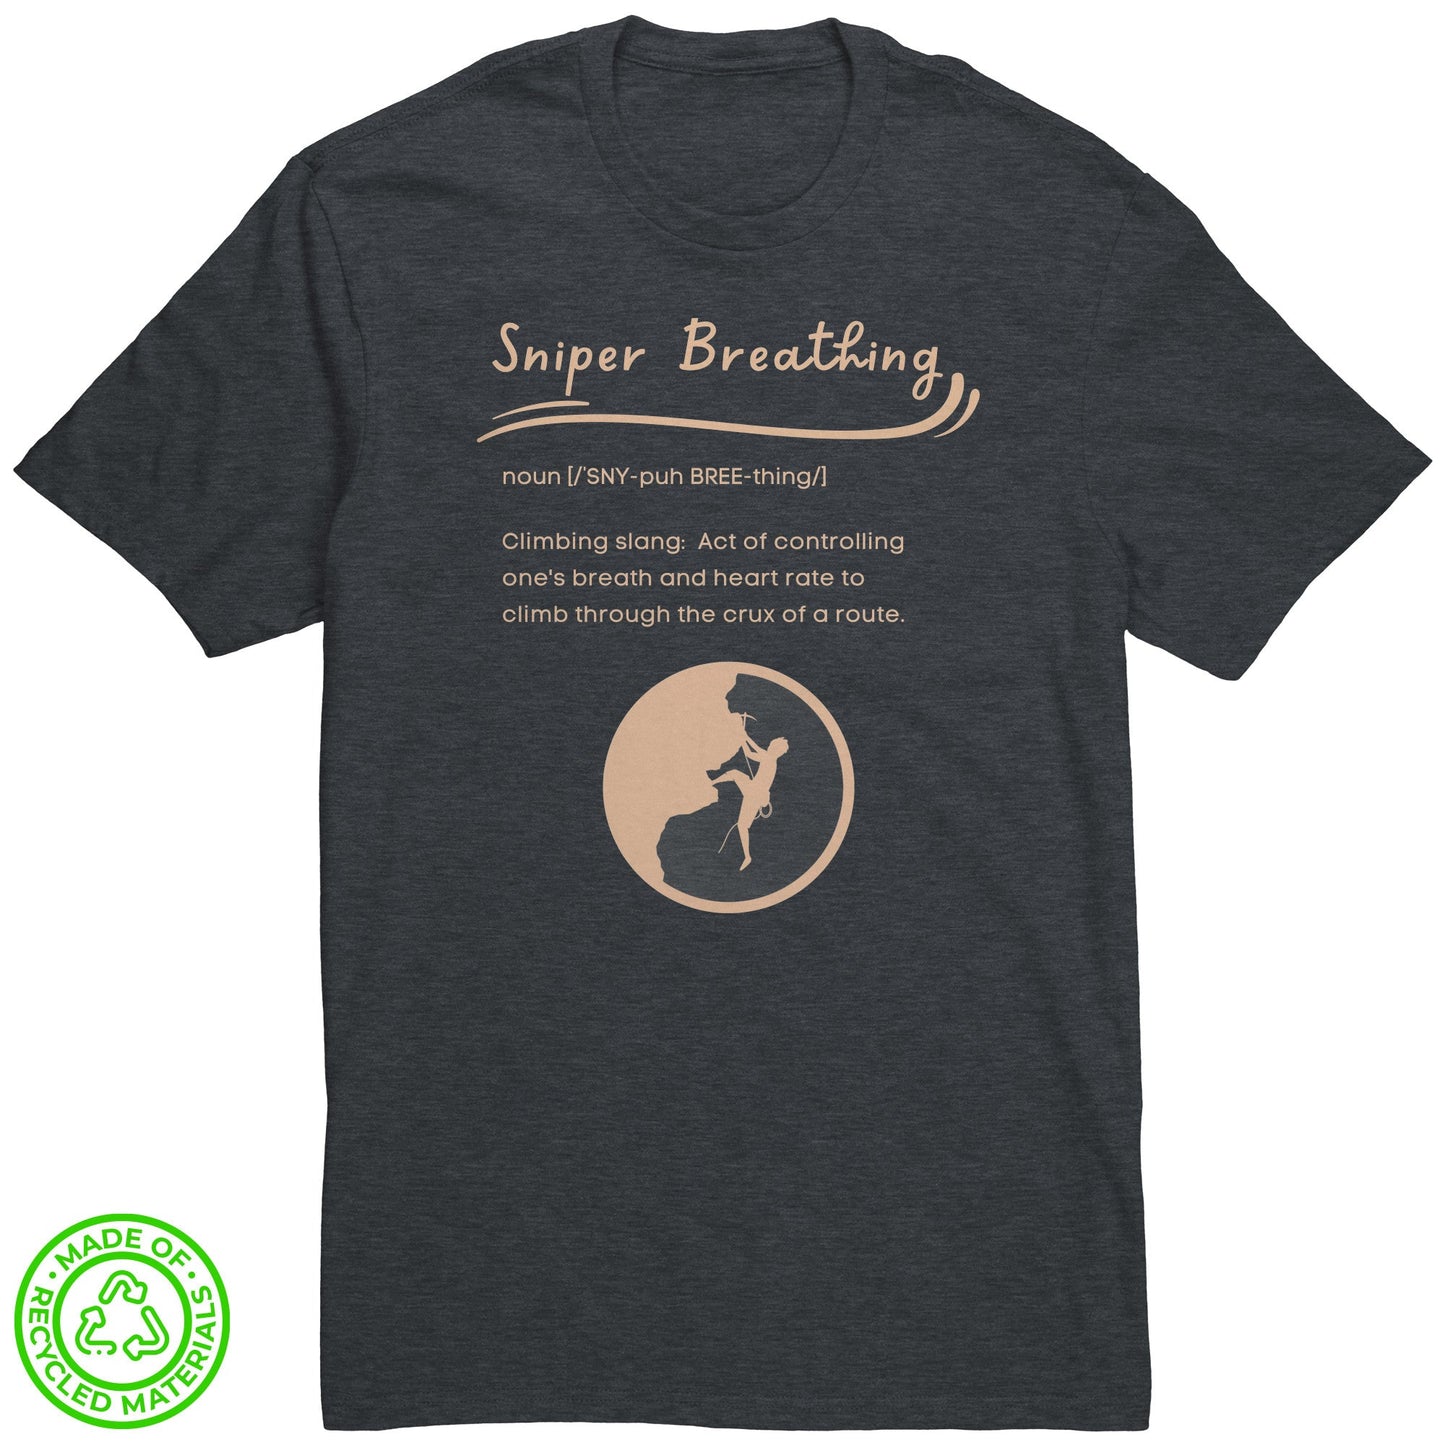 Eco-Friendly Re-Tee (Sniper Breathing)